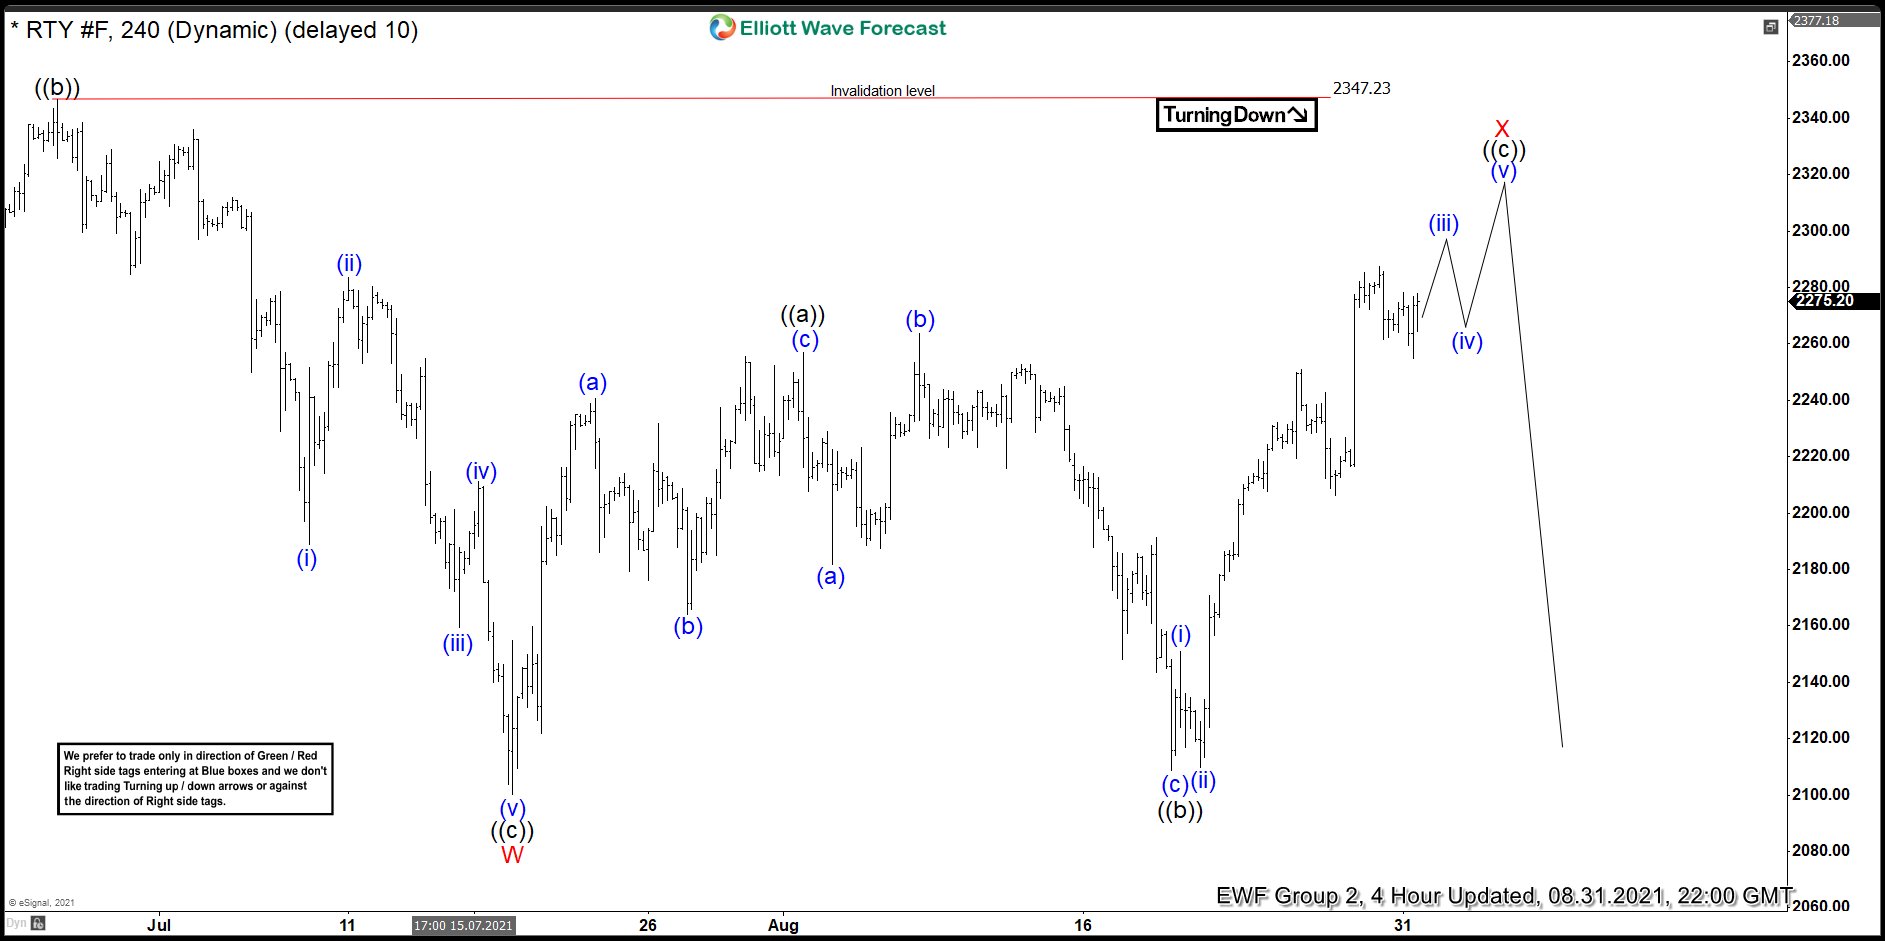 RUSSELL Made Turn Lower After Elliott Wave Flat Pattern